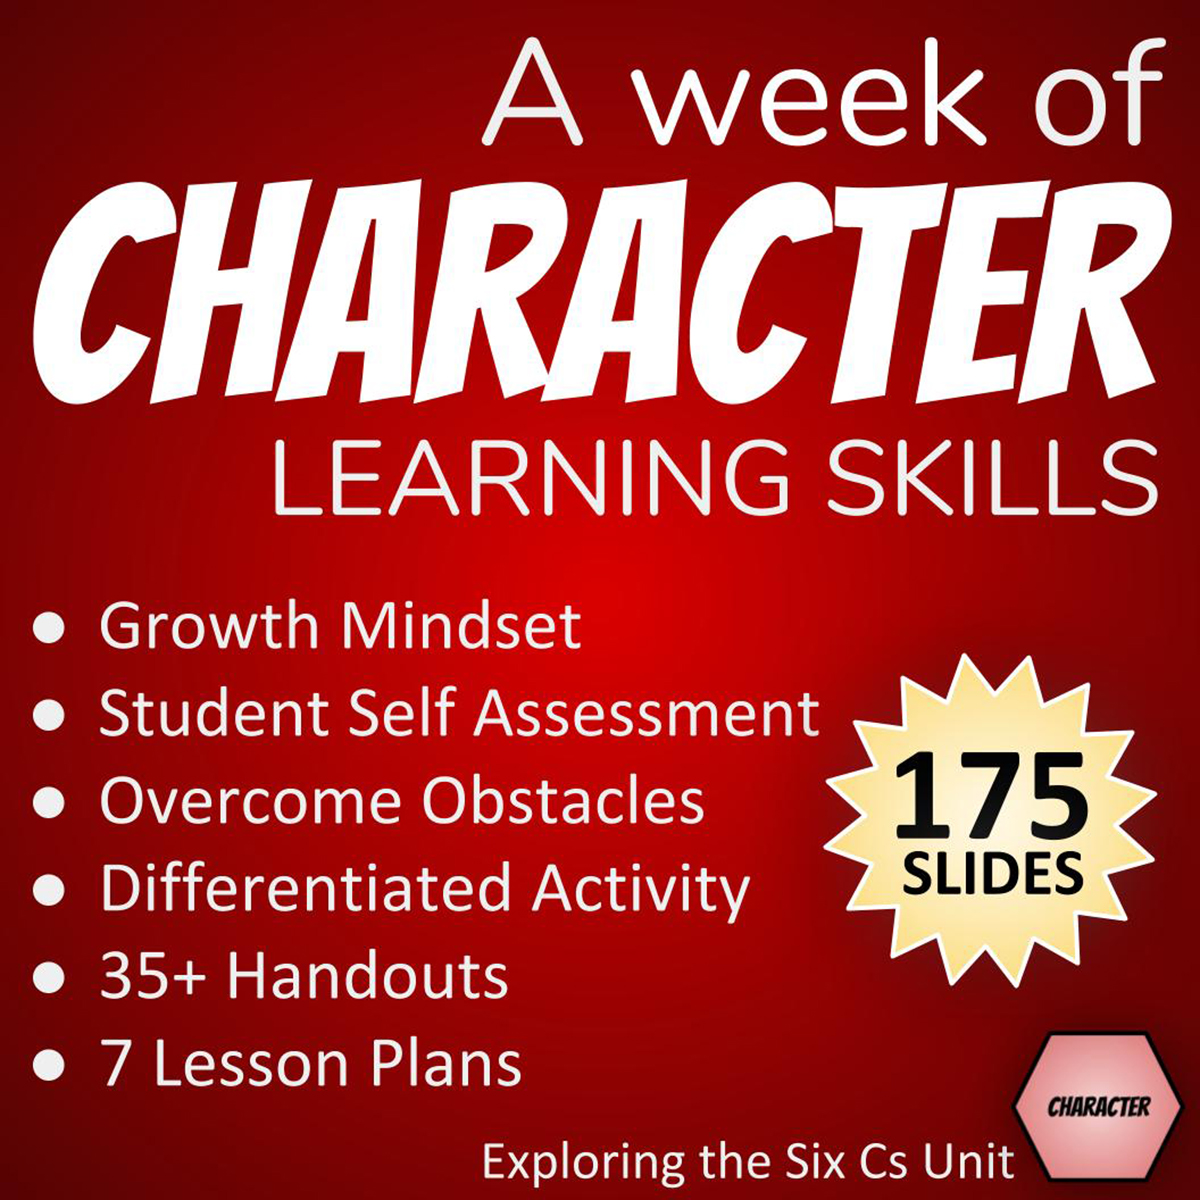 A week of Character Learning Skills: Growth Mindset, Student Self Assessment, Overcome Obstacles, Differentiated Activity, 35+ Handouts, 7 Lesson Plans, 175 slides